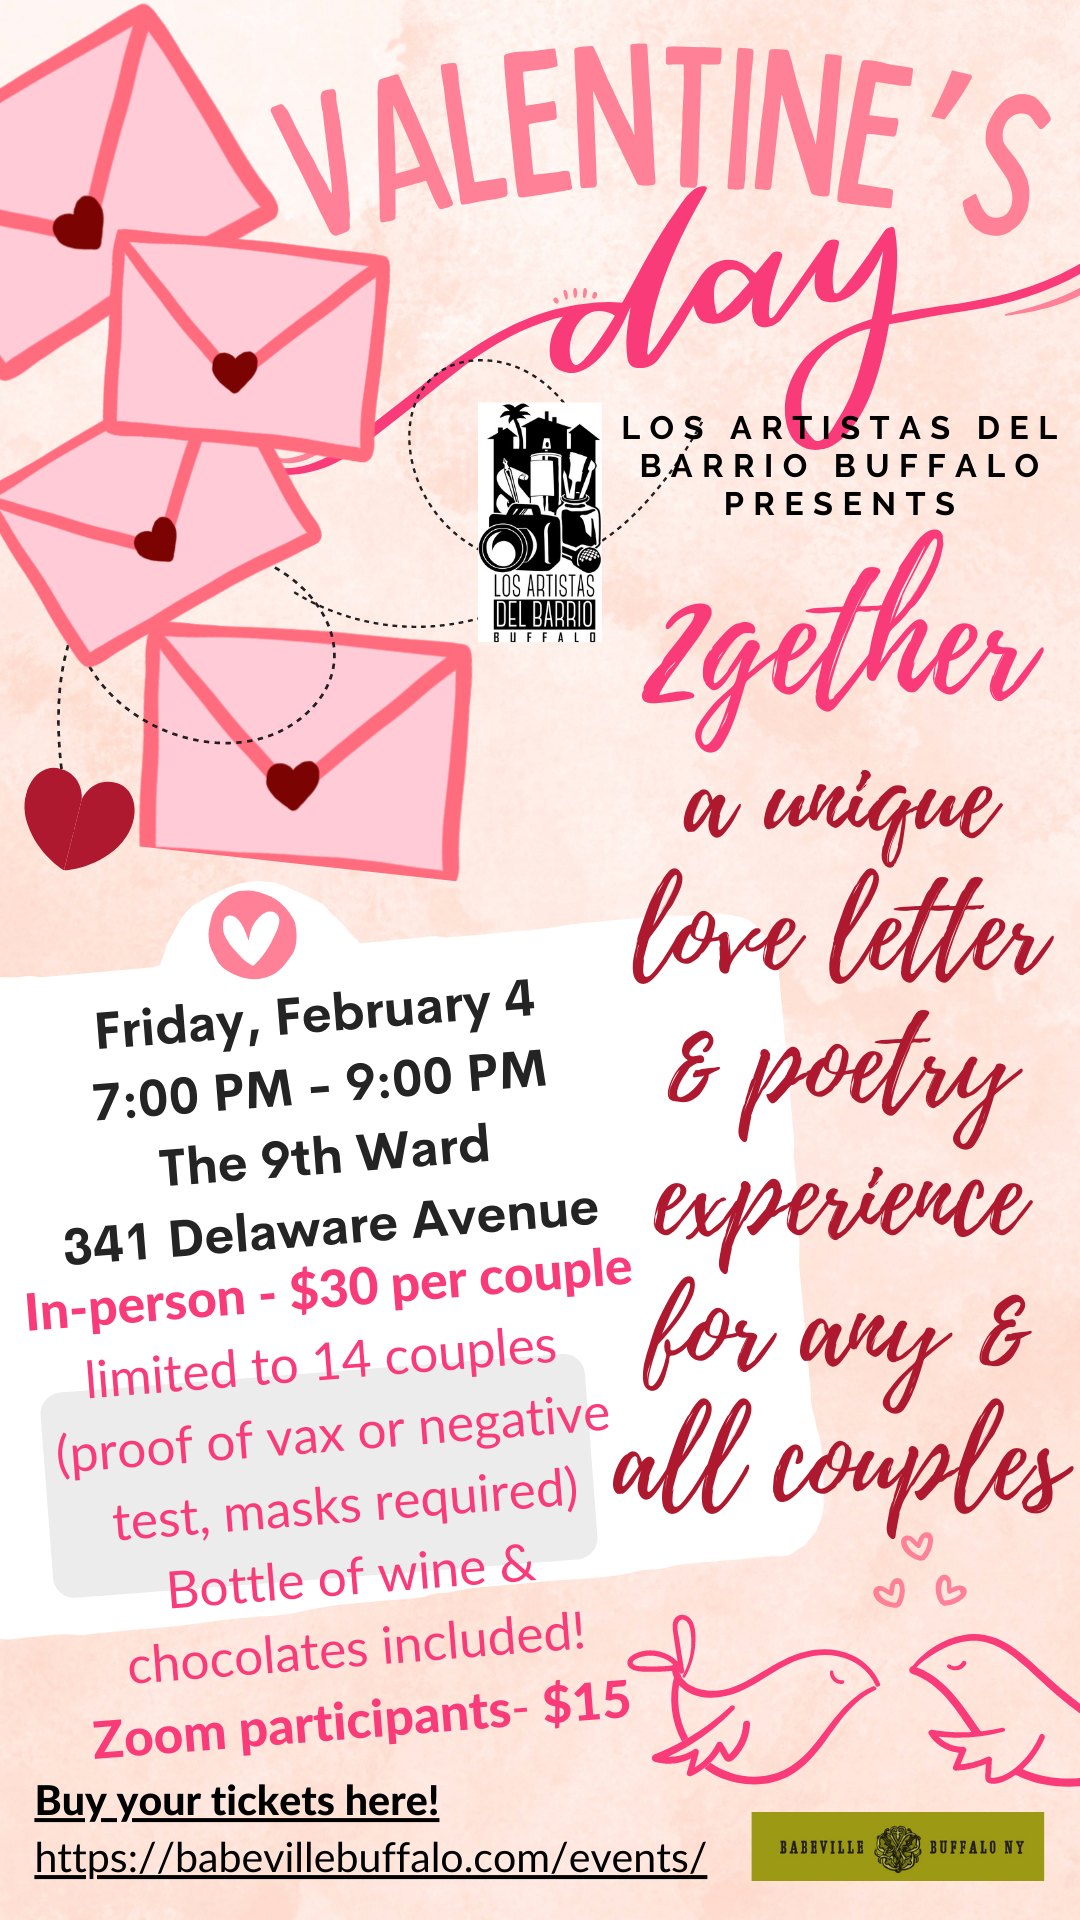 2gether:  A Unique Valentine's Day Love Letter & Poetry Experience with LAdB's Julio Montalvo Valentin